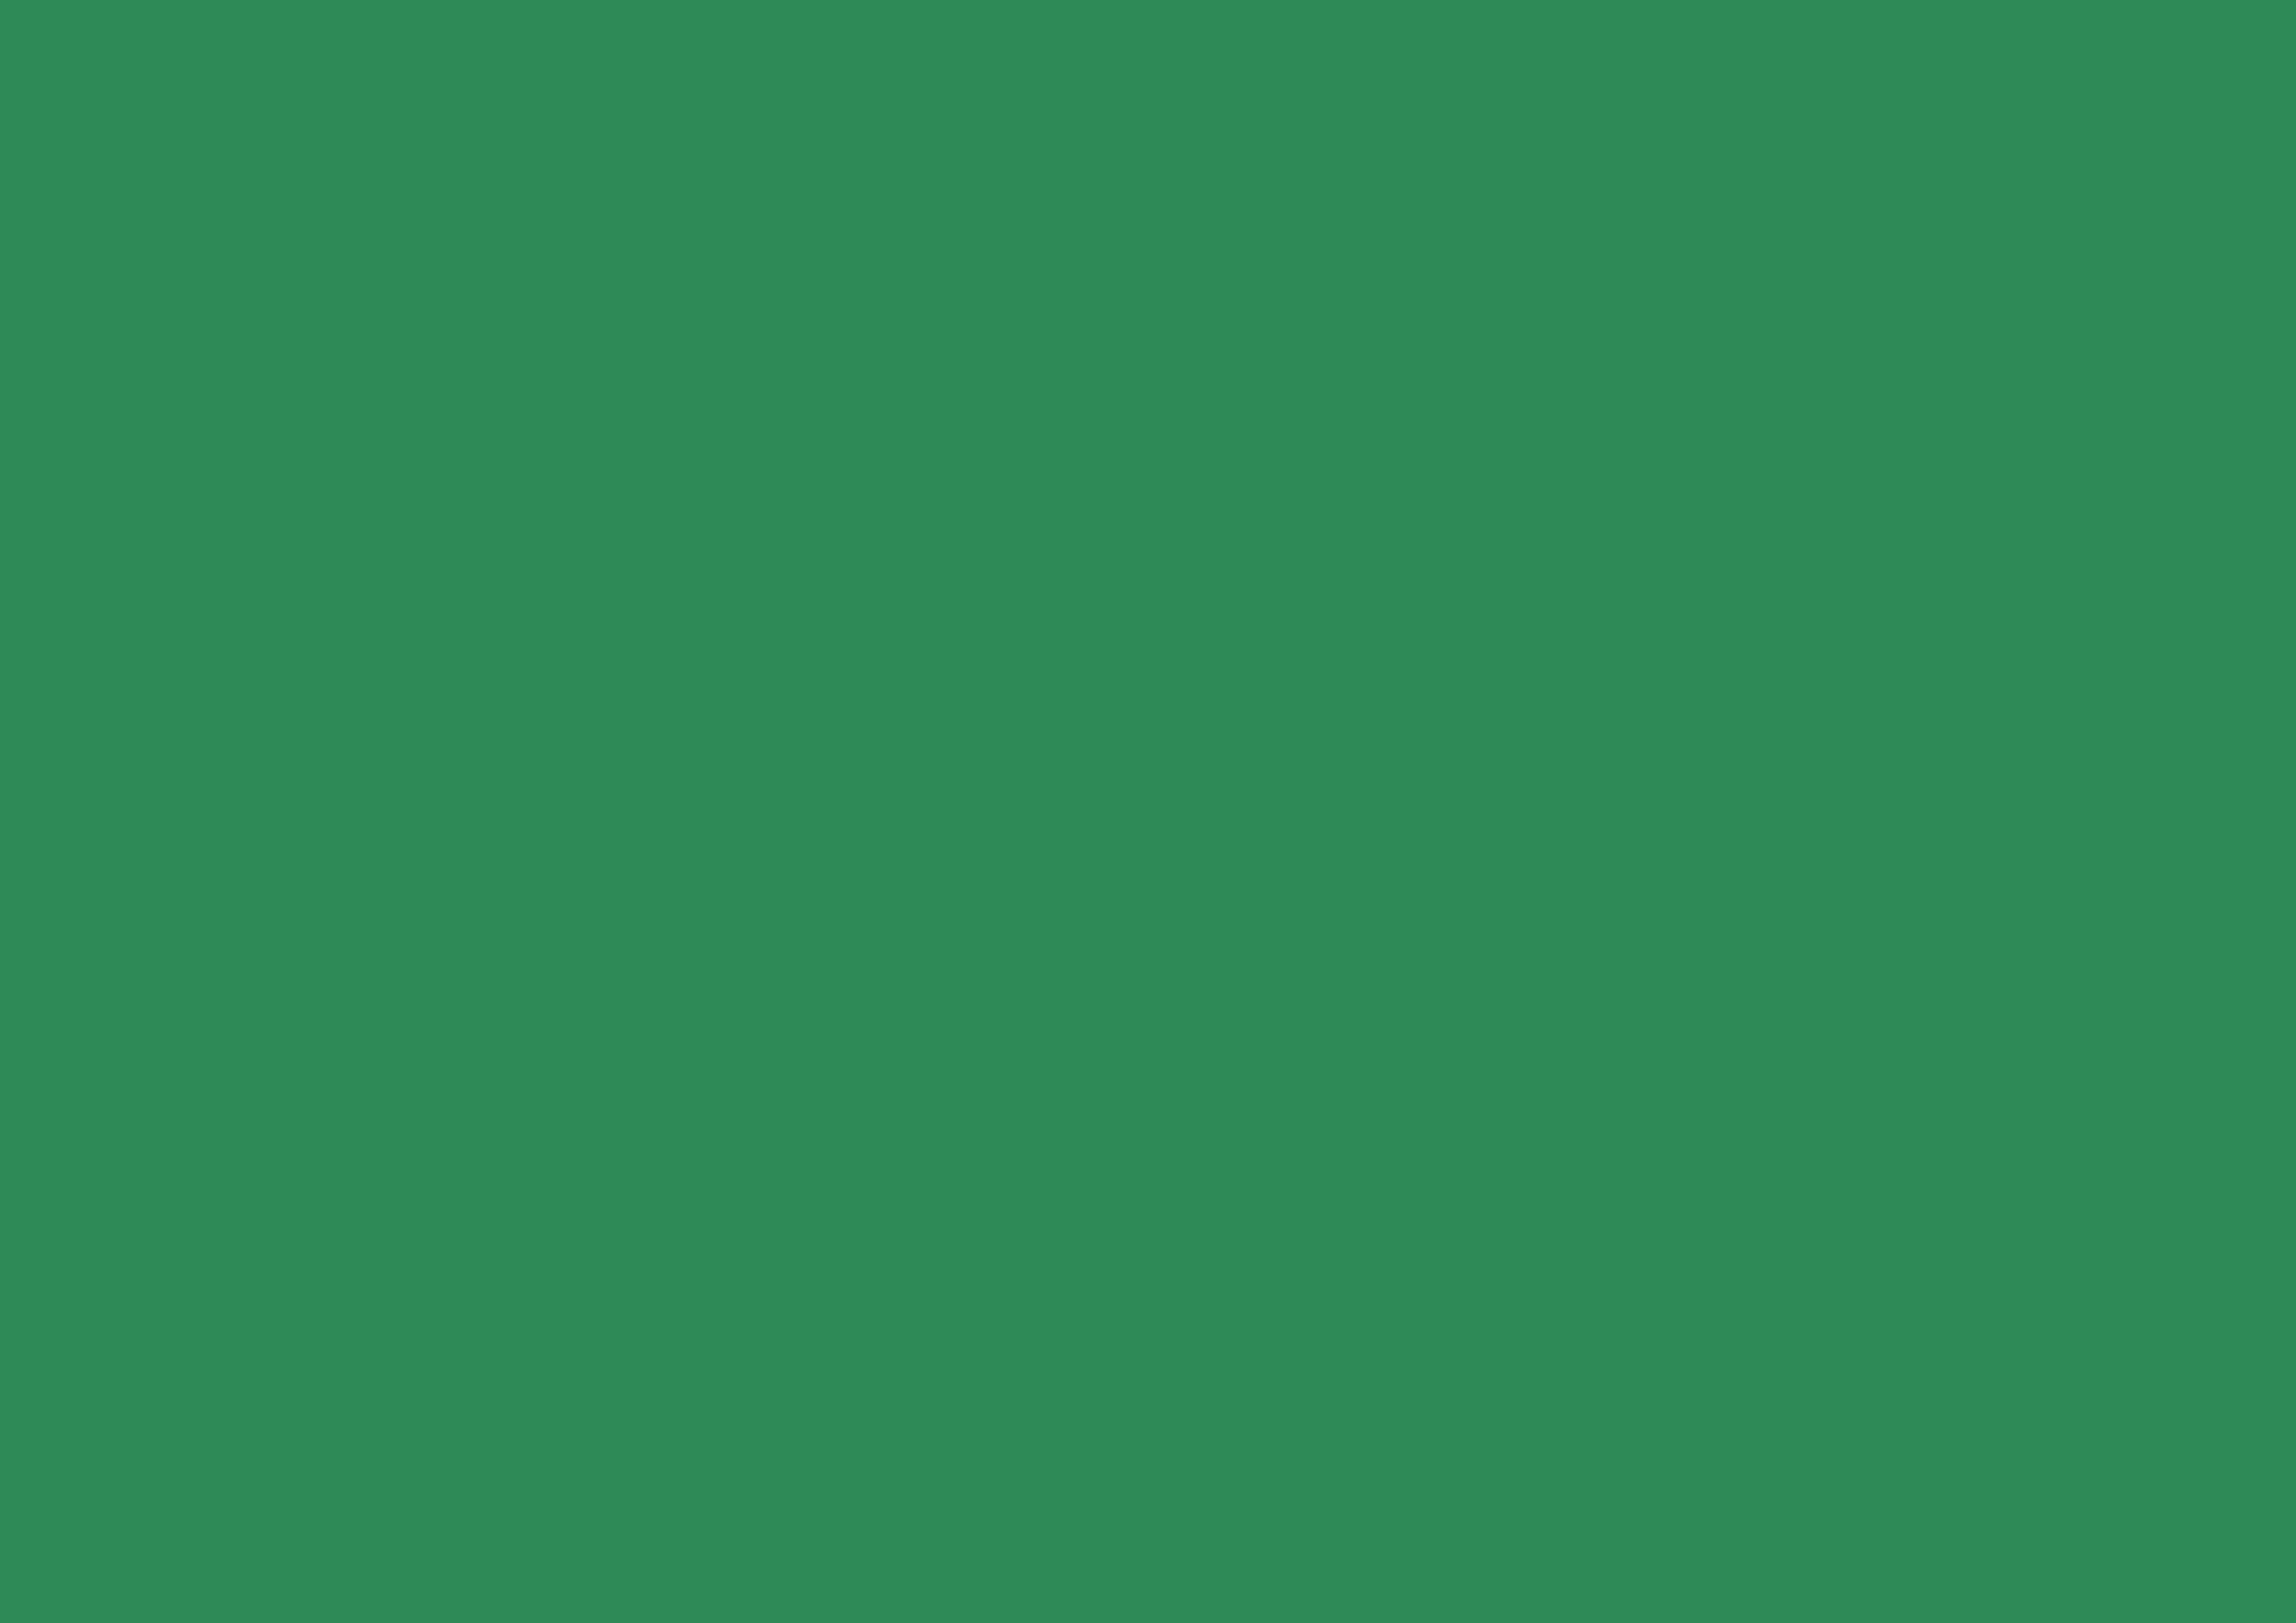 3508x2480 Sea Green Solid Color Background